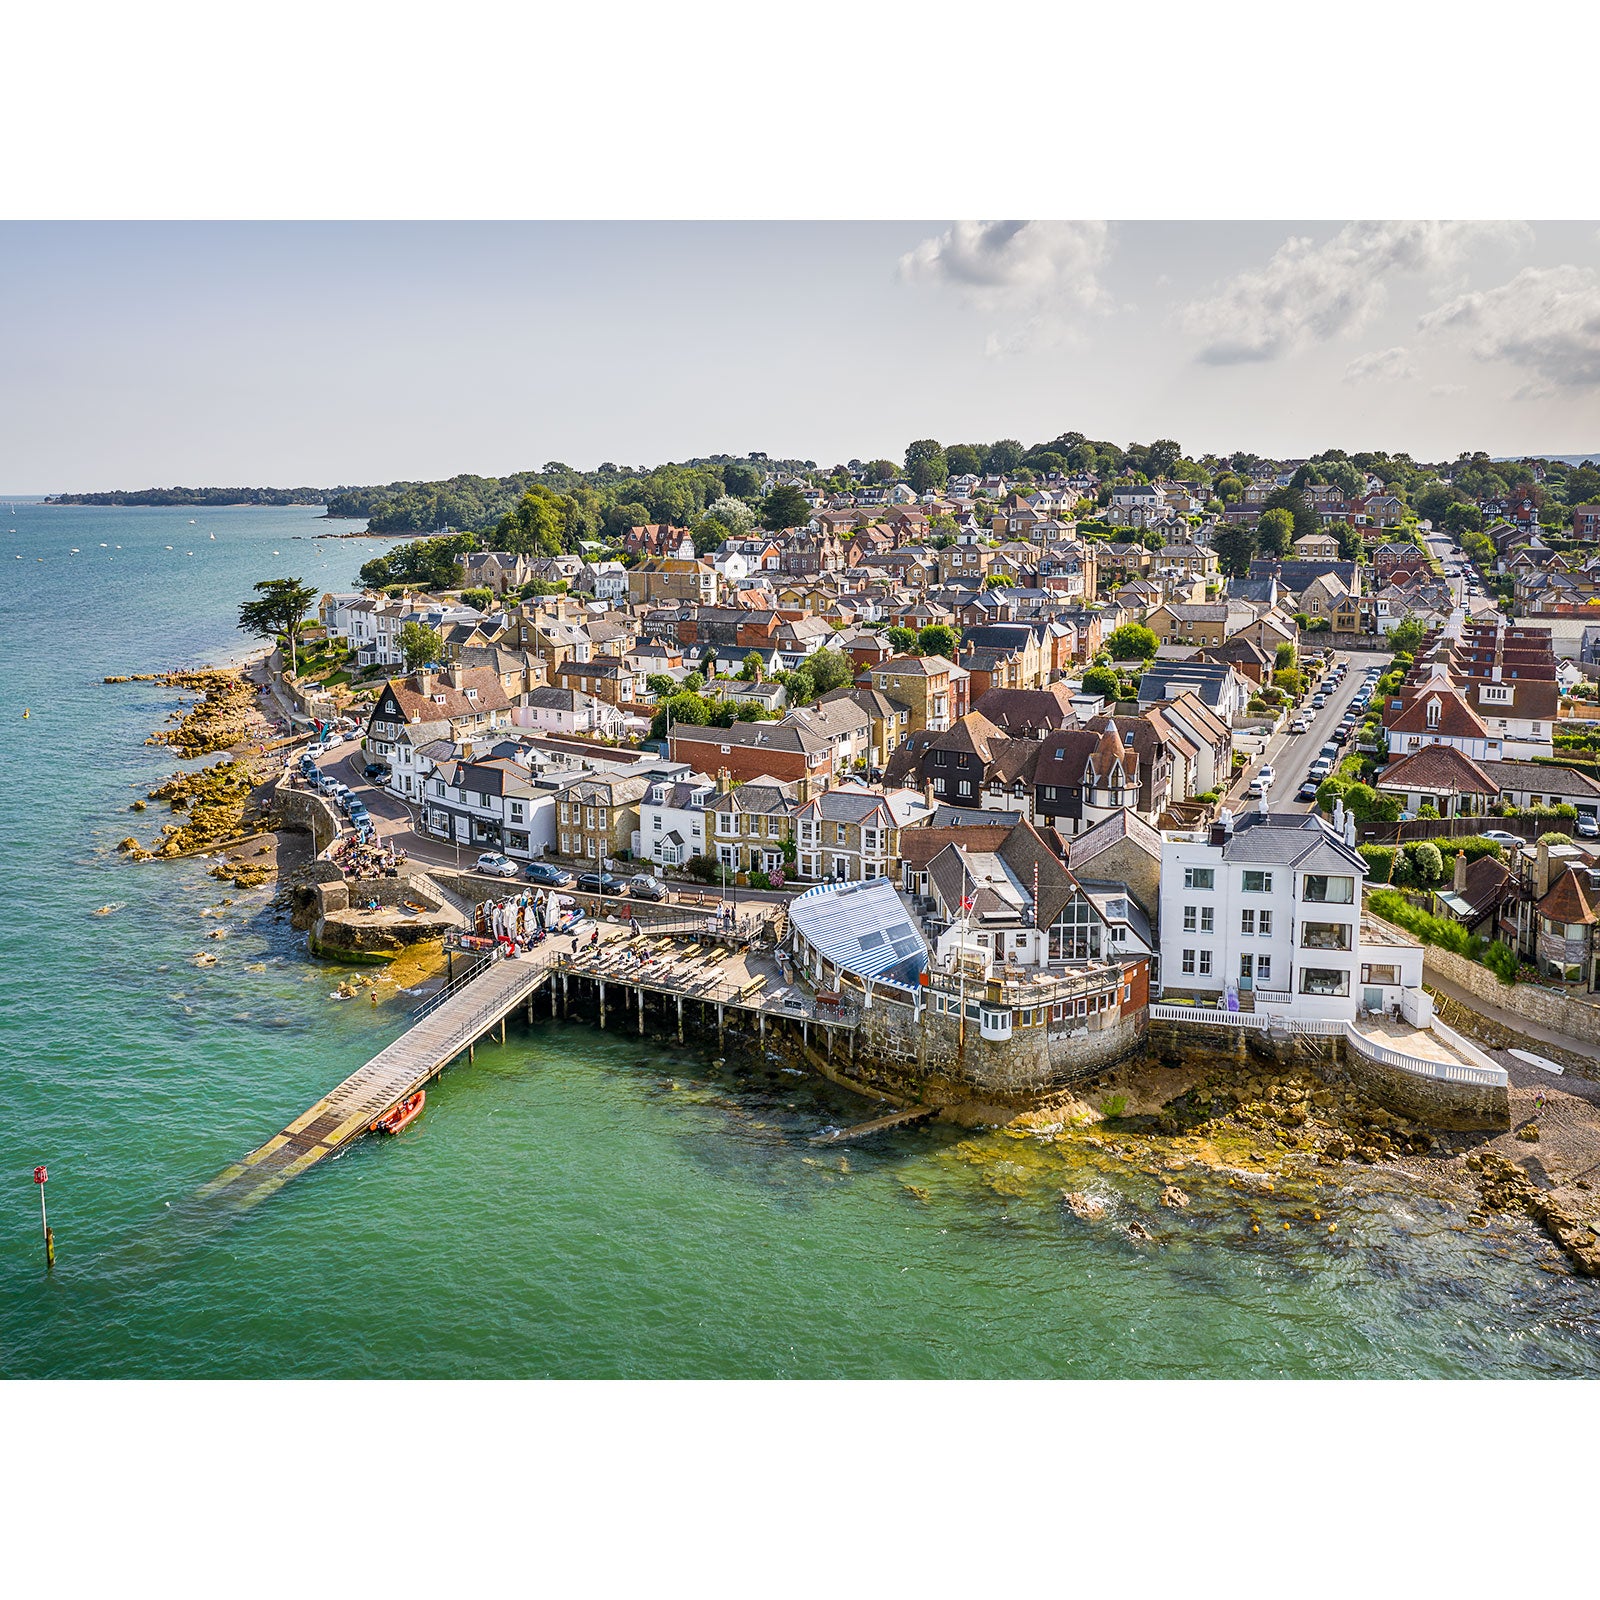 Aerial view of Seaview, a coastal town on the Isle of Wight with buildings adjacent to a pier extending into clear blue waters, captured by Available Light Photography.